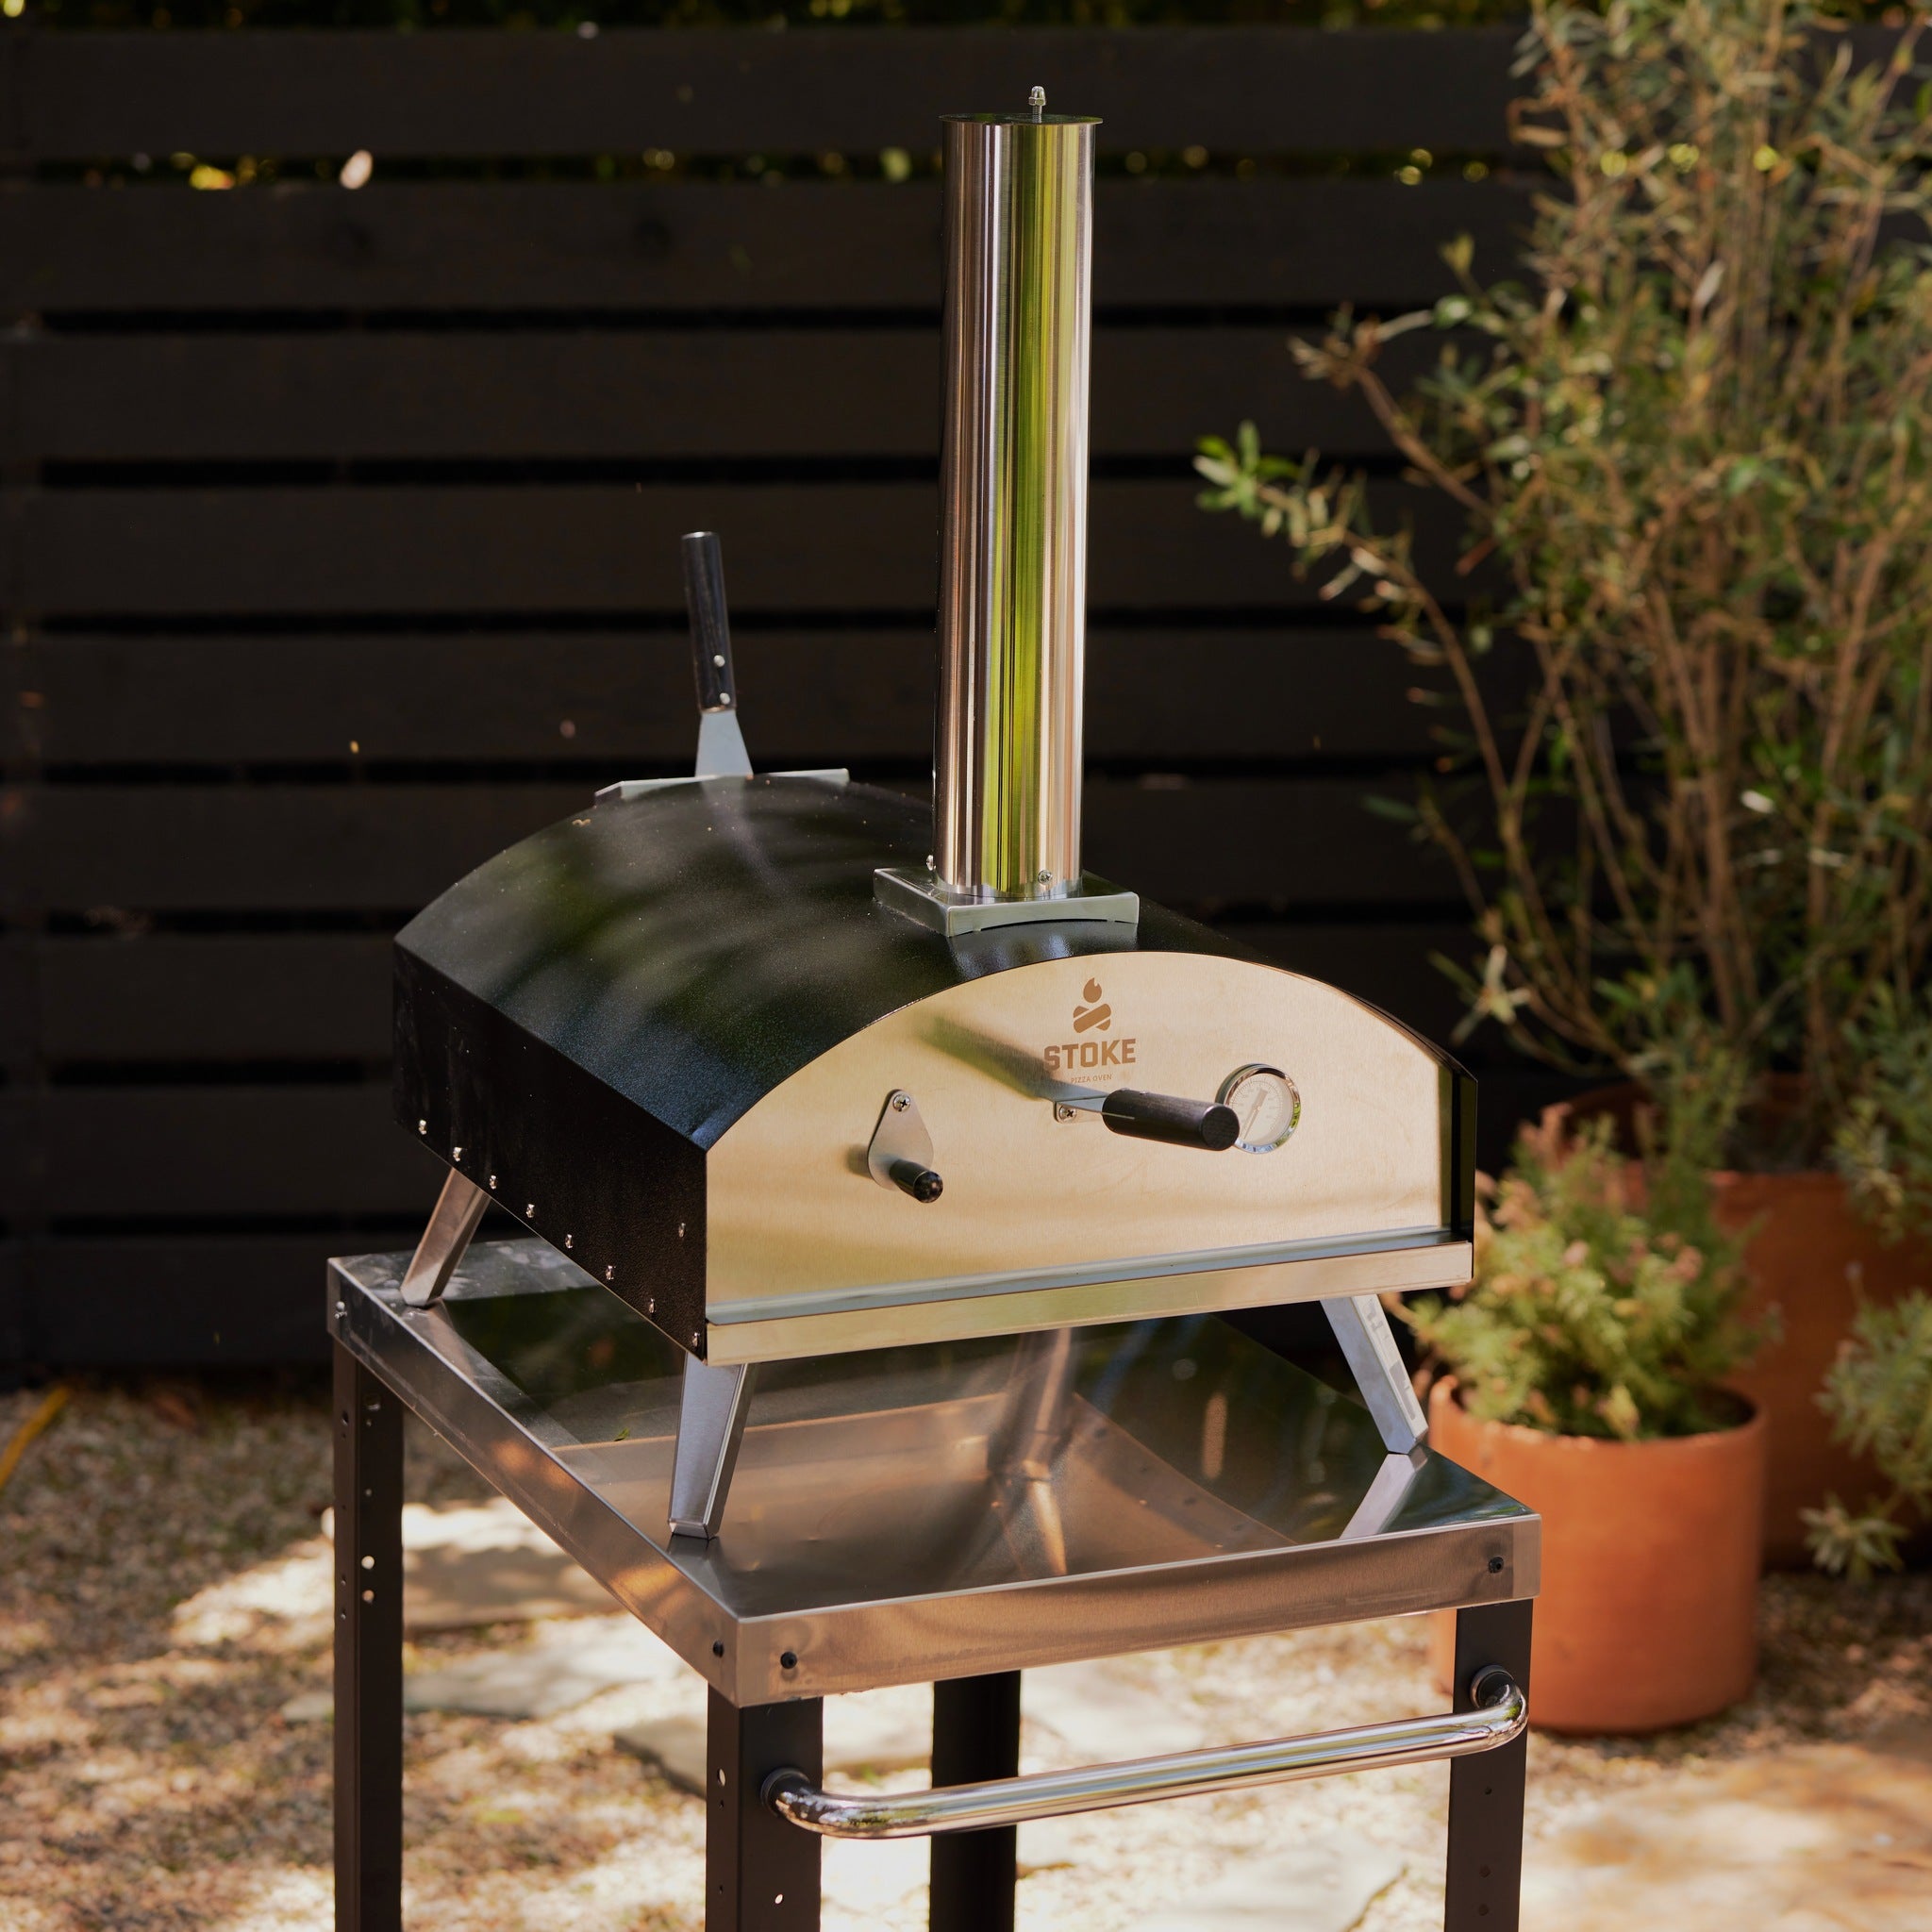 Outdoor Pizza Oven Pizza Grilling 13'' Portable Gas Oven, Outside